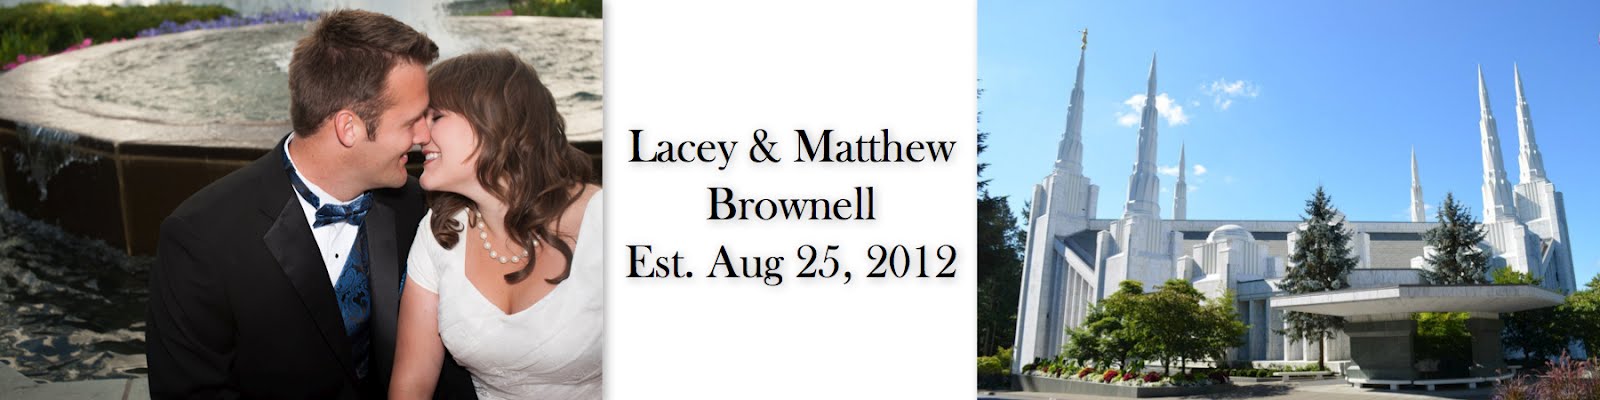 Matthew and Lacey Brownell